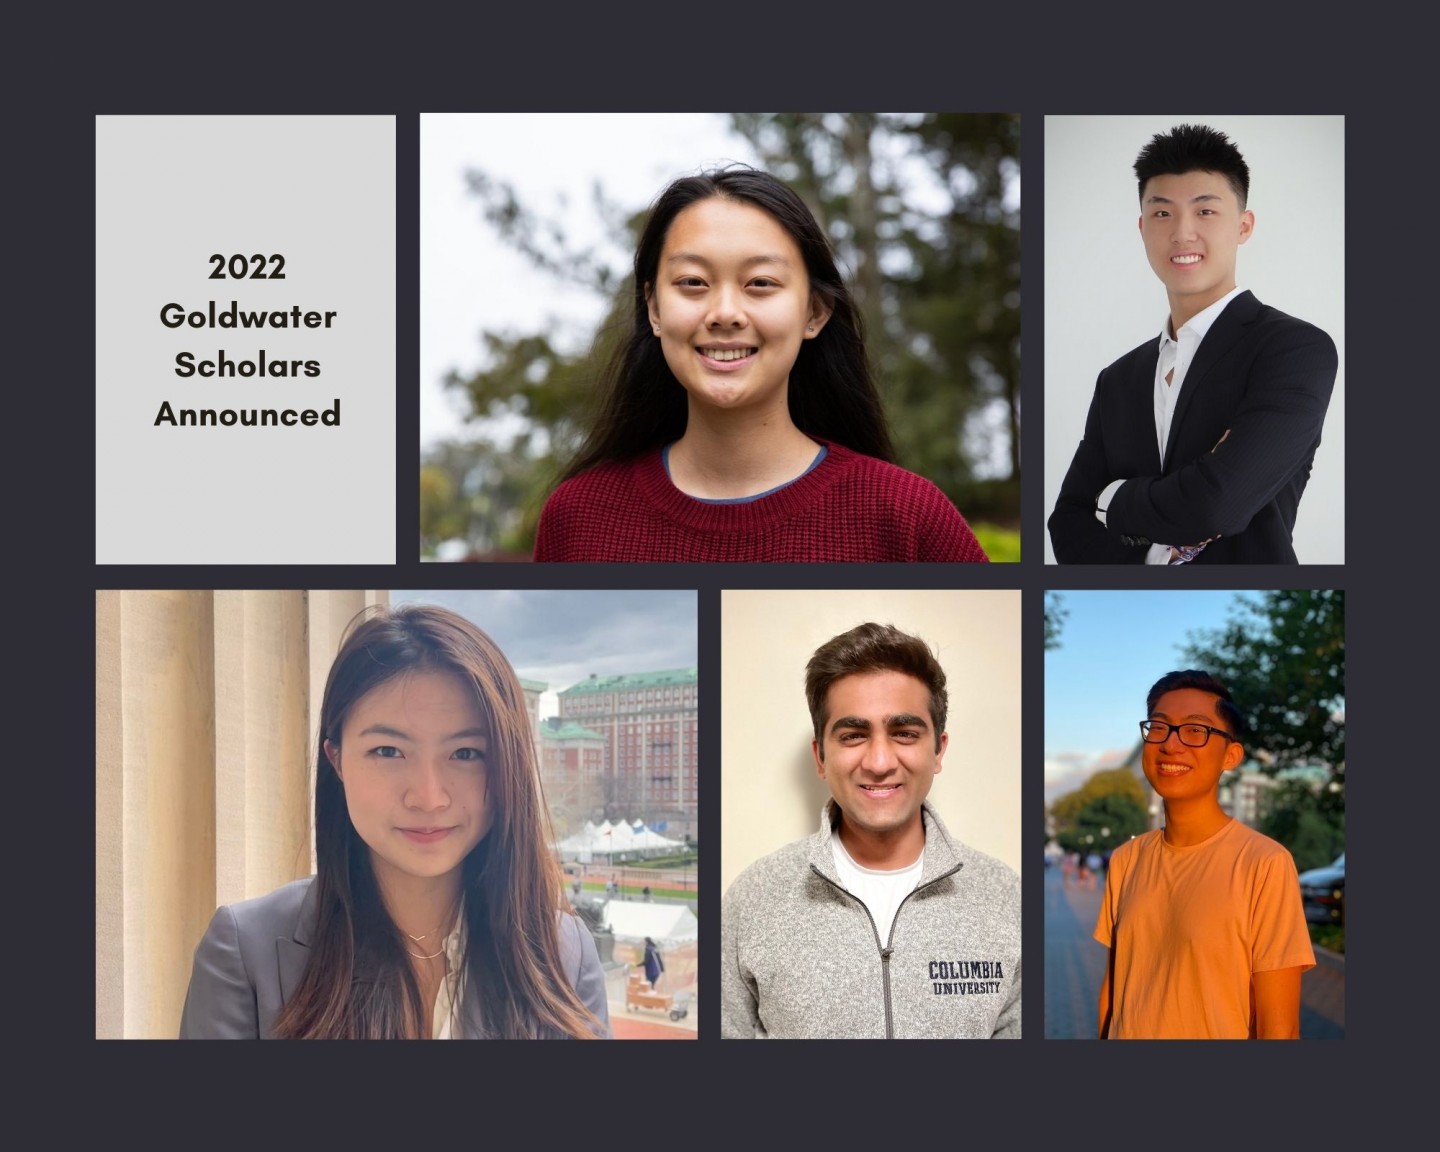 2022 Goldwater Scholars Announced